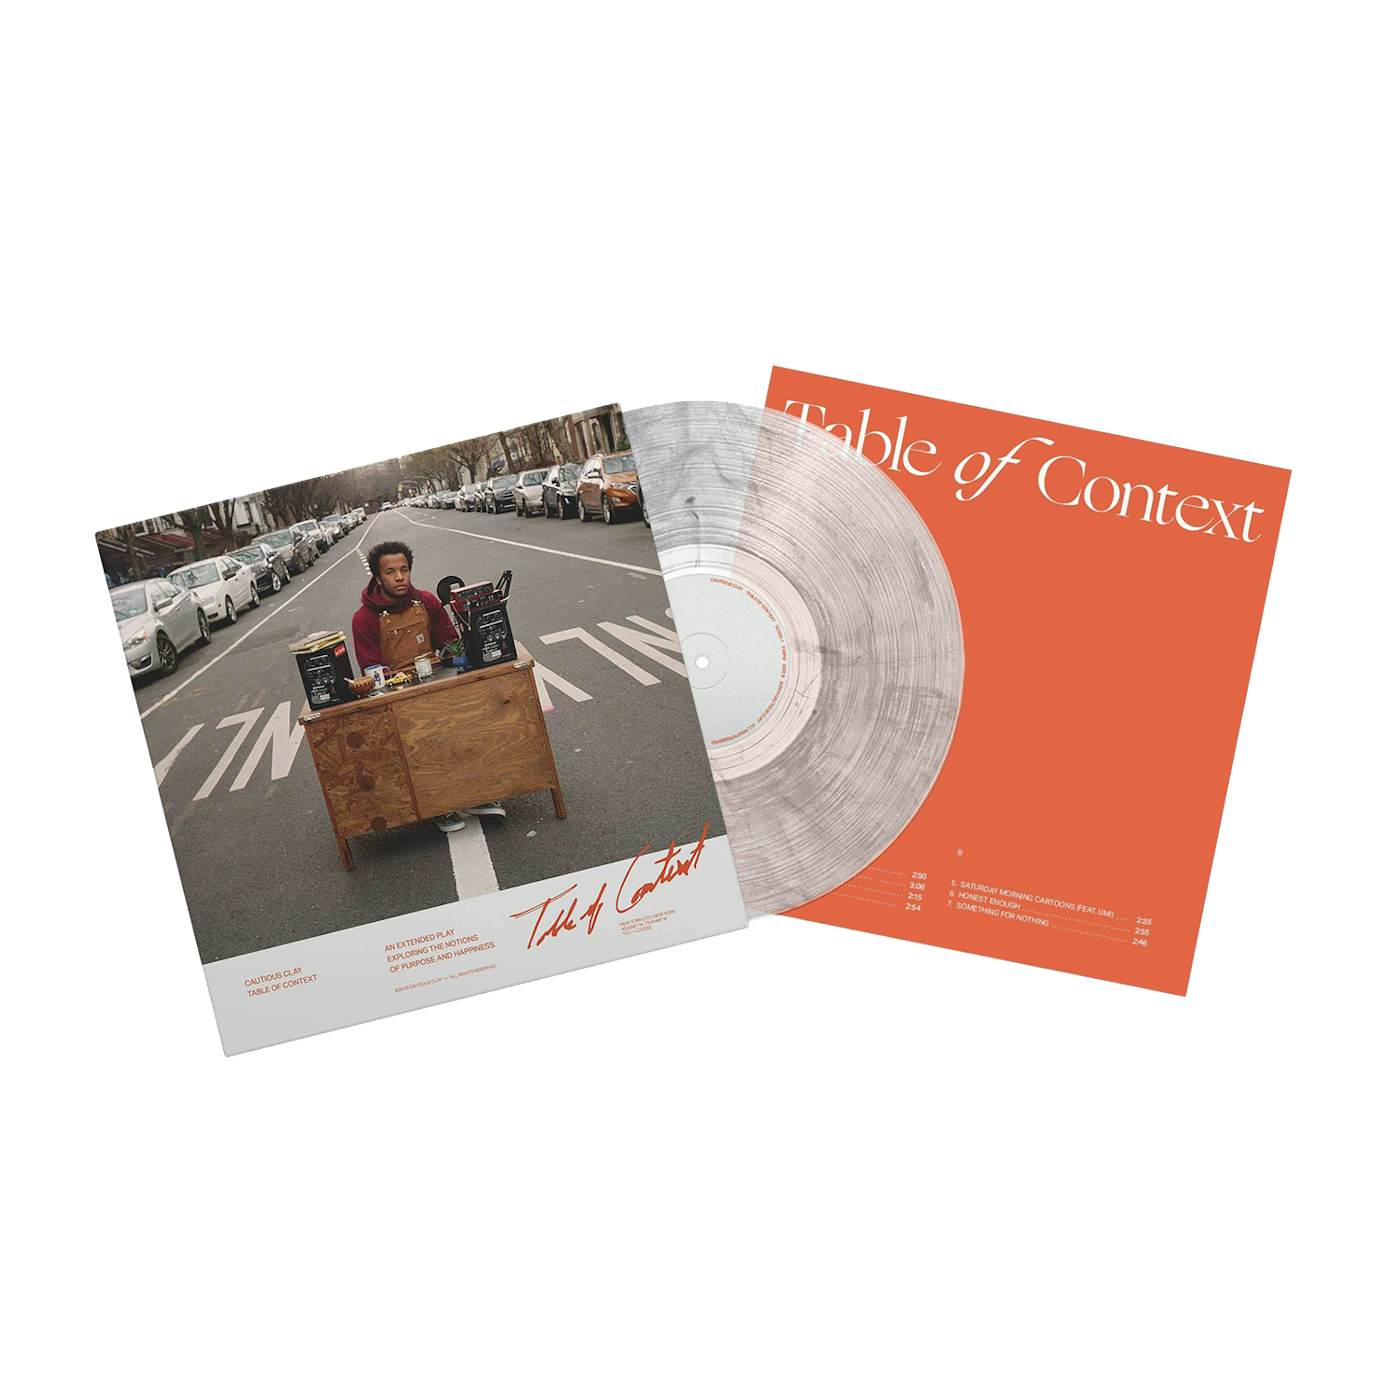 Cautious Clay Table of Context 12" Vinyl (Ultra Clear w/ Black Smoke Limited Edition)